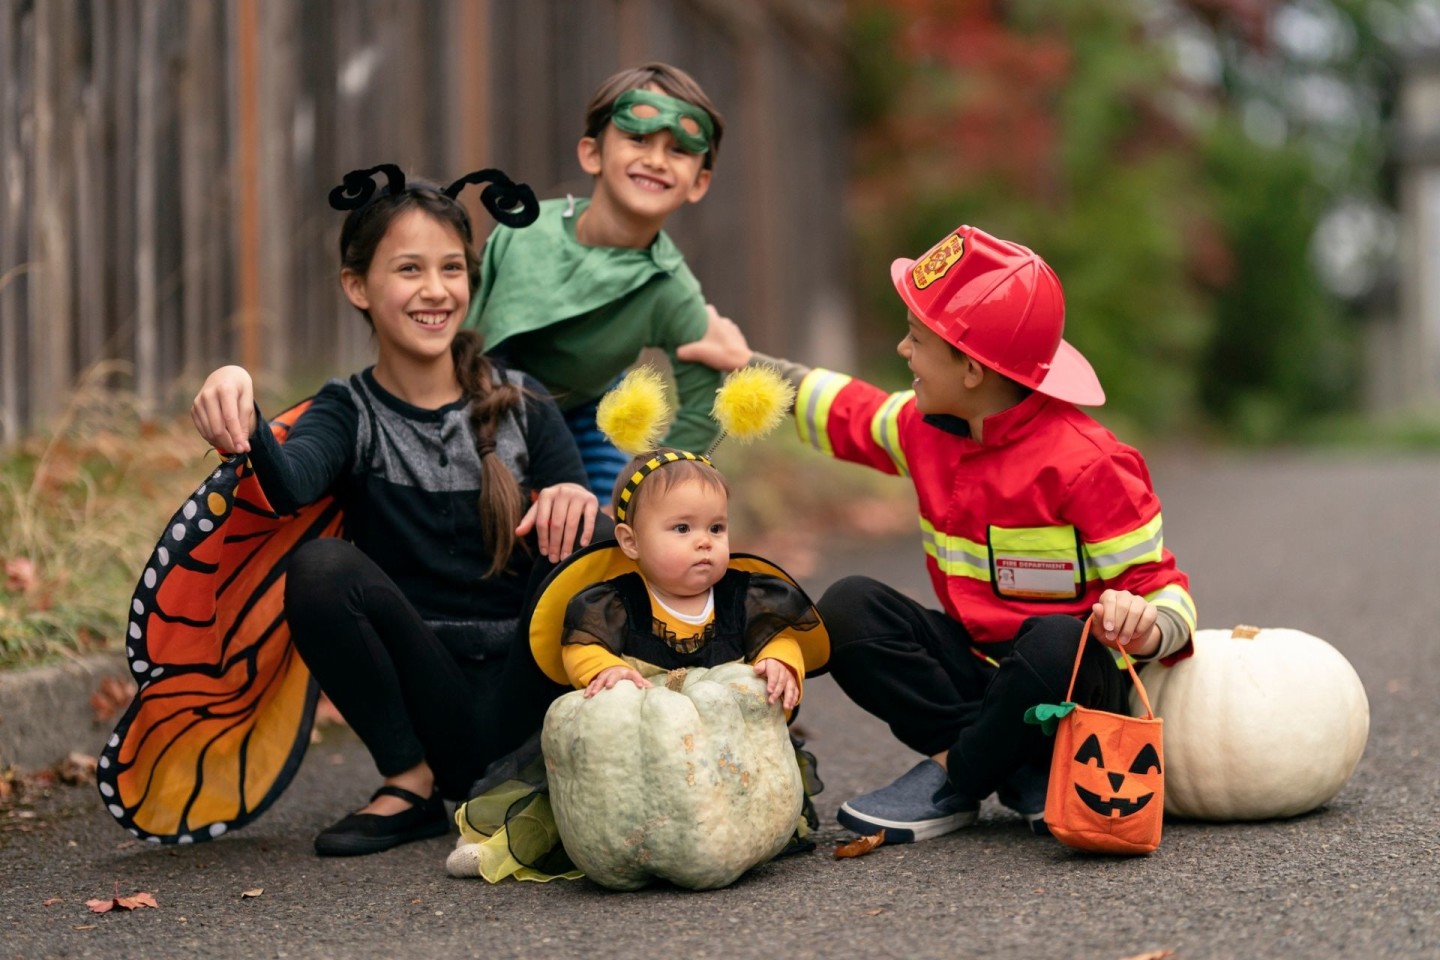 Halloween sleep tips, a group of trick or treaters celebrate Halloween in costumes